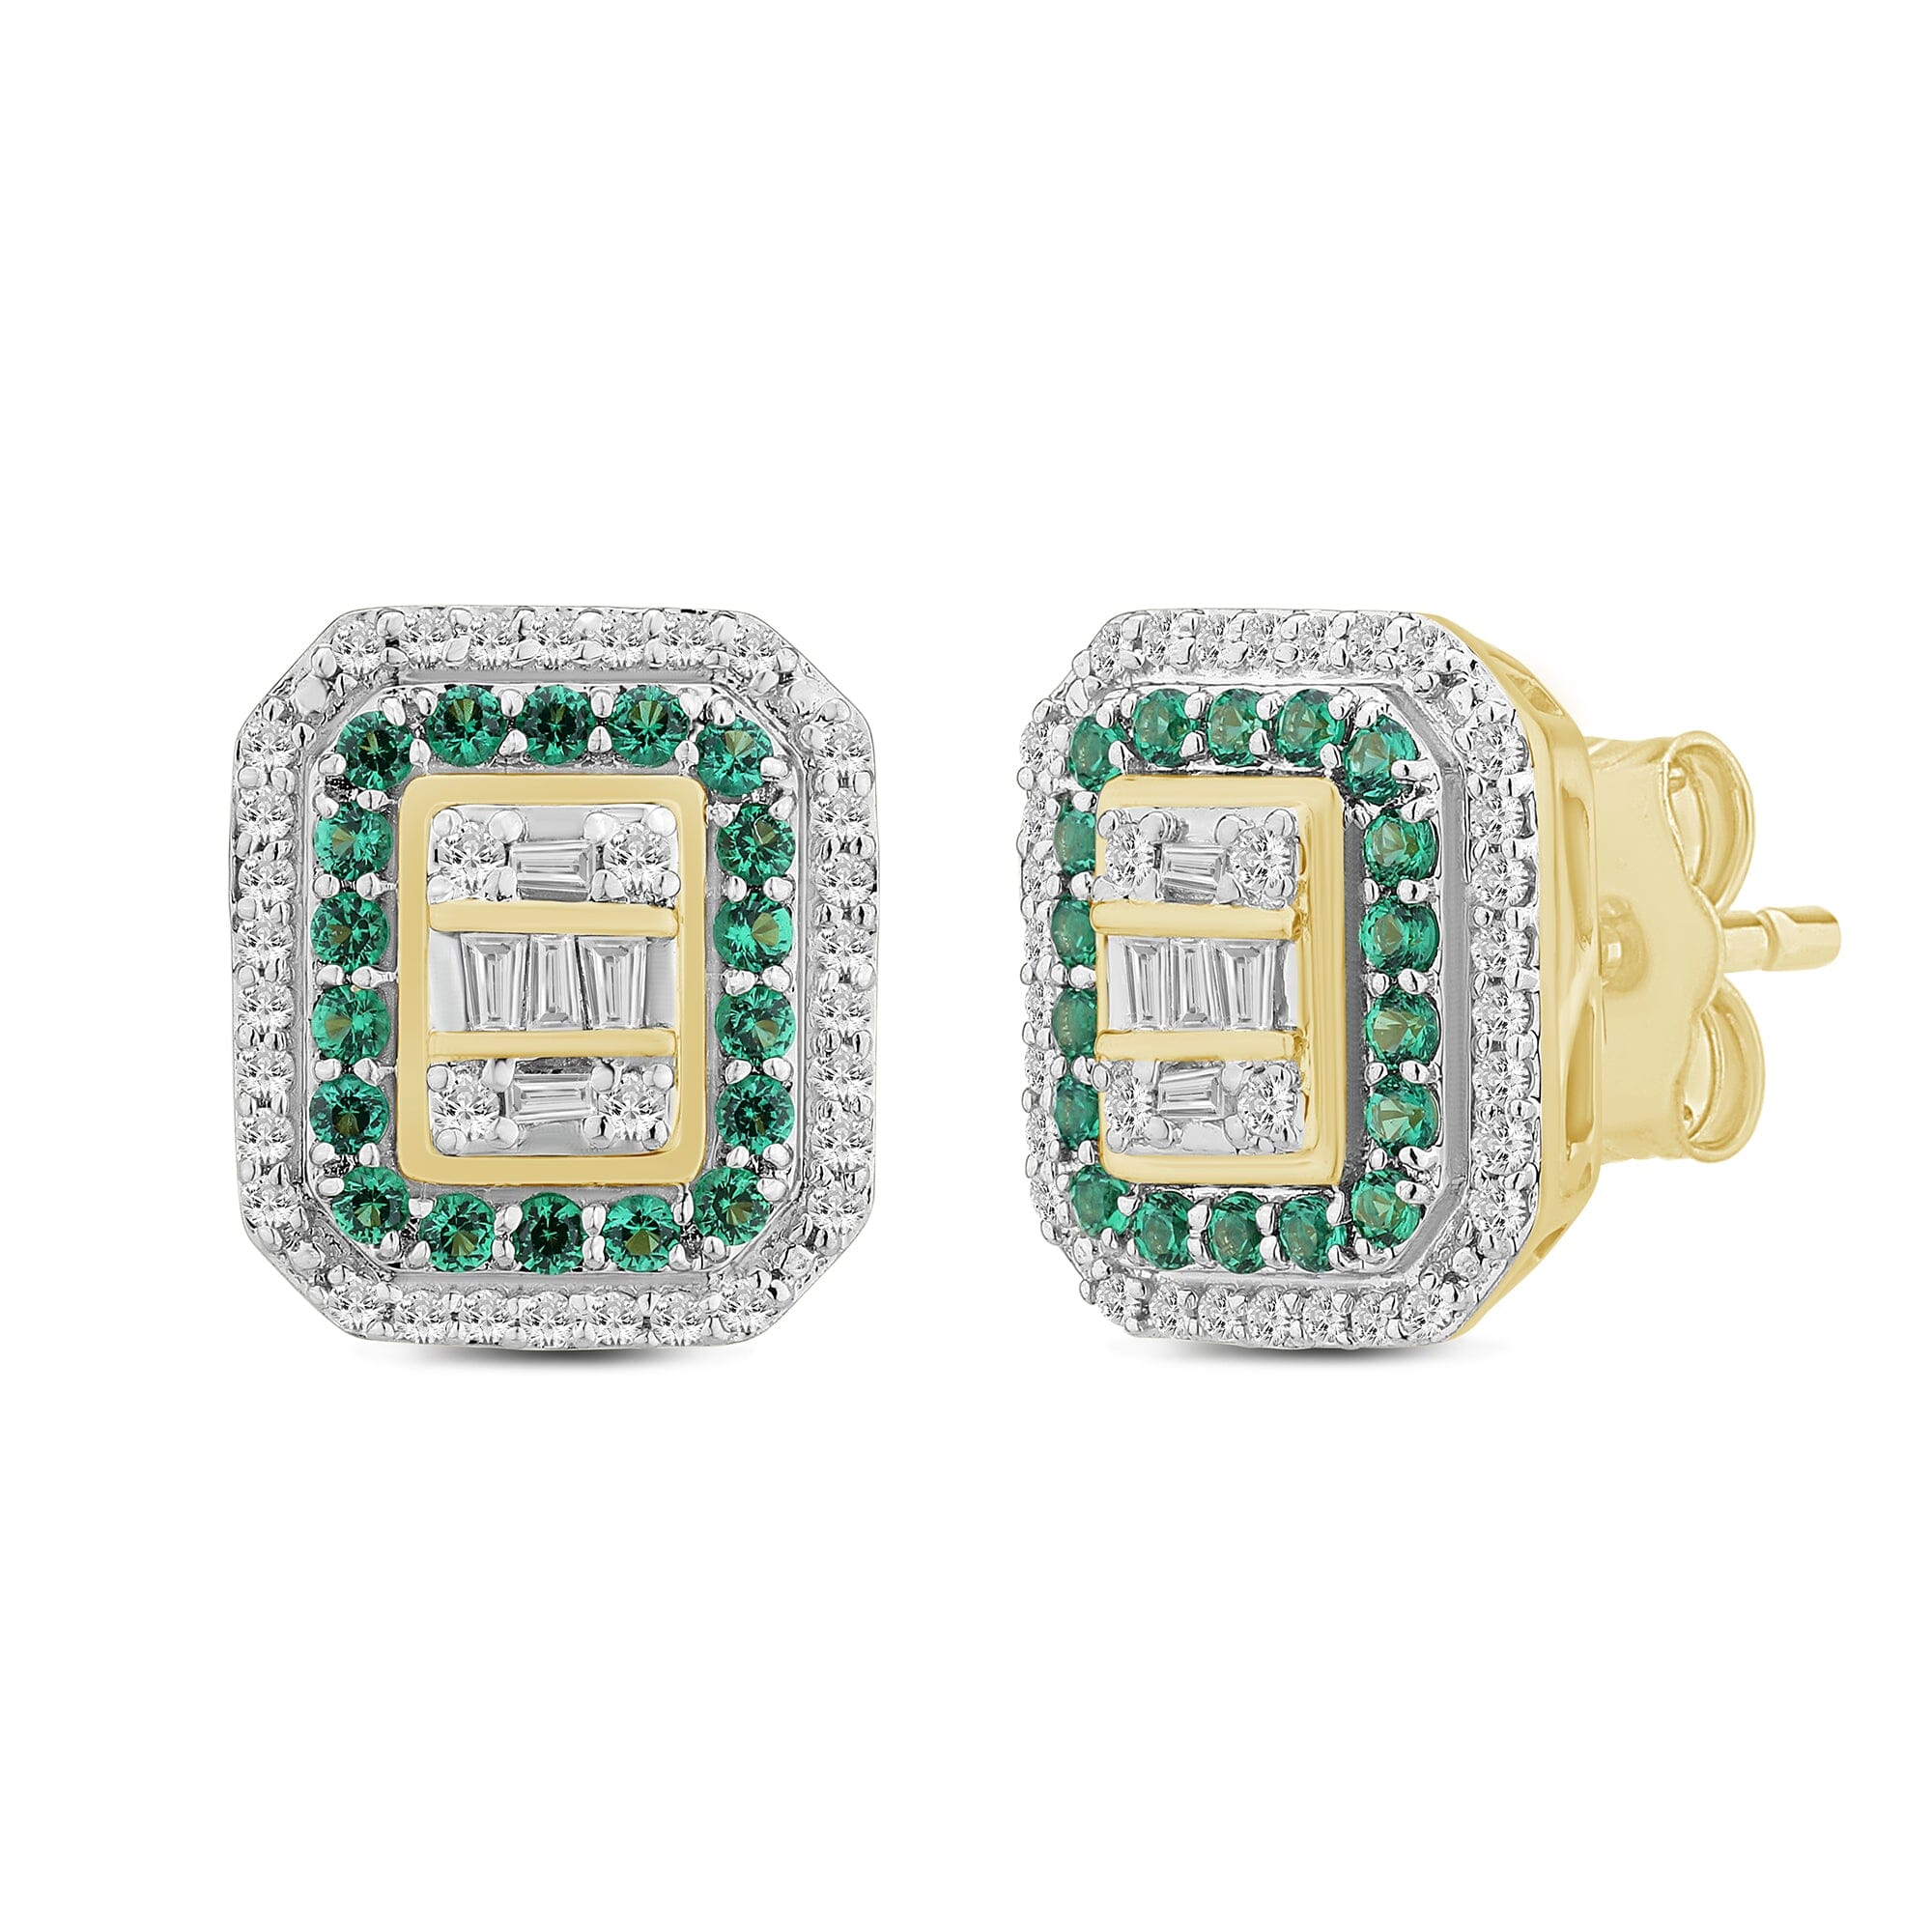 Created Emerald Stud Earrings with 1/4ct of Diamonds in 9ct Yellow Gold Earrings Bevilles 